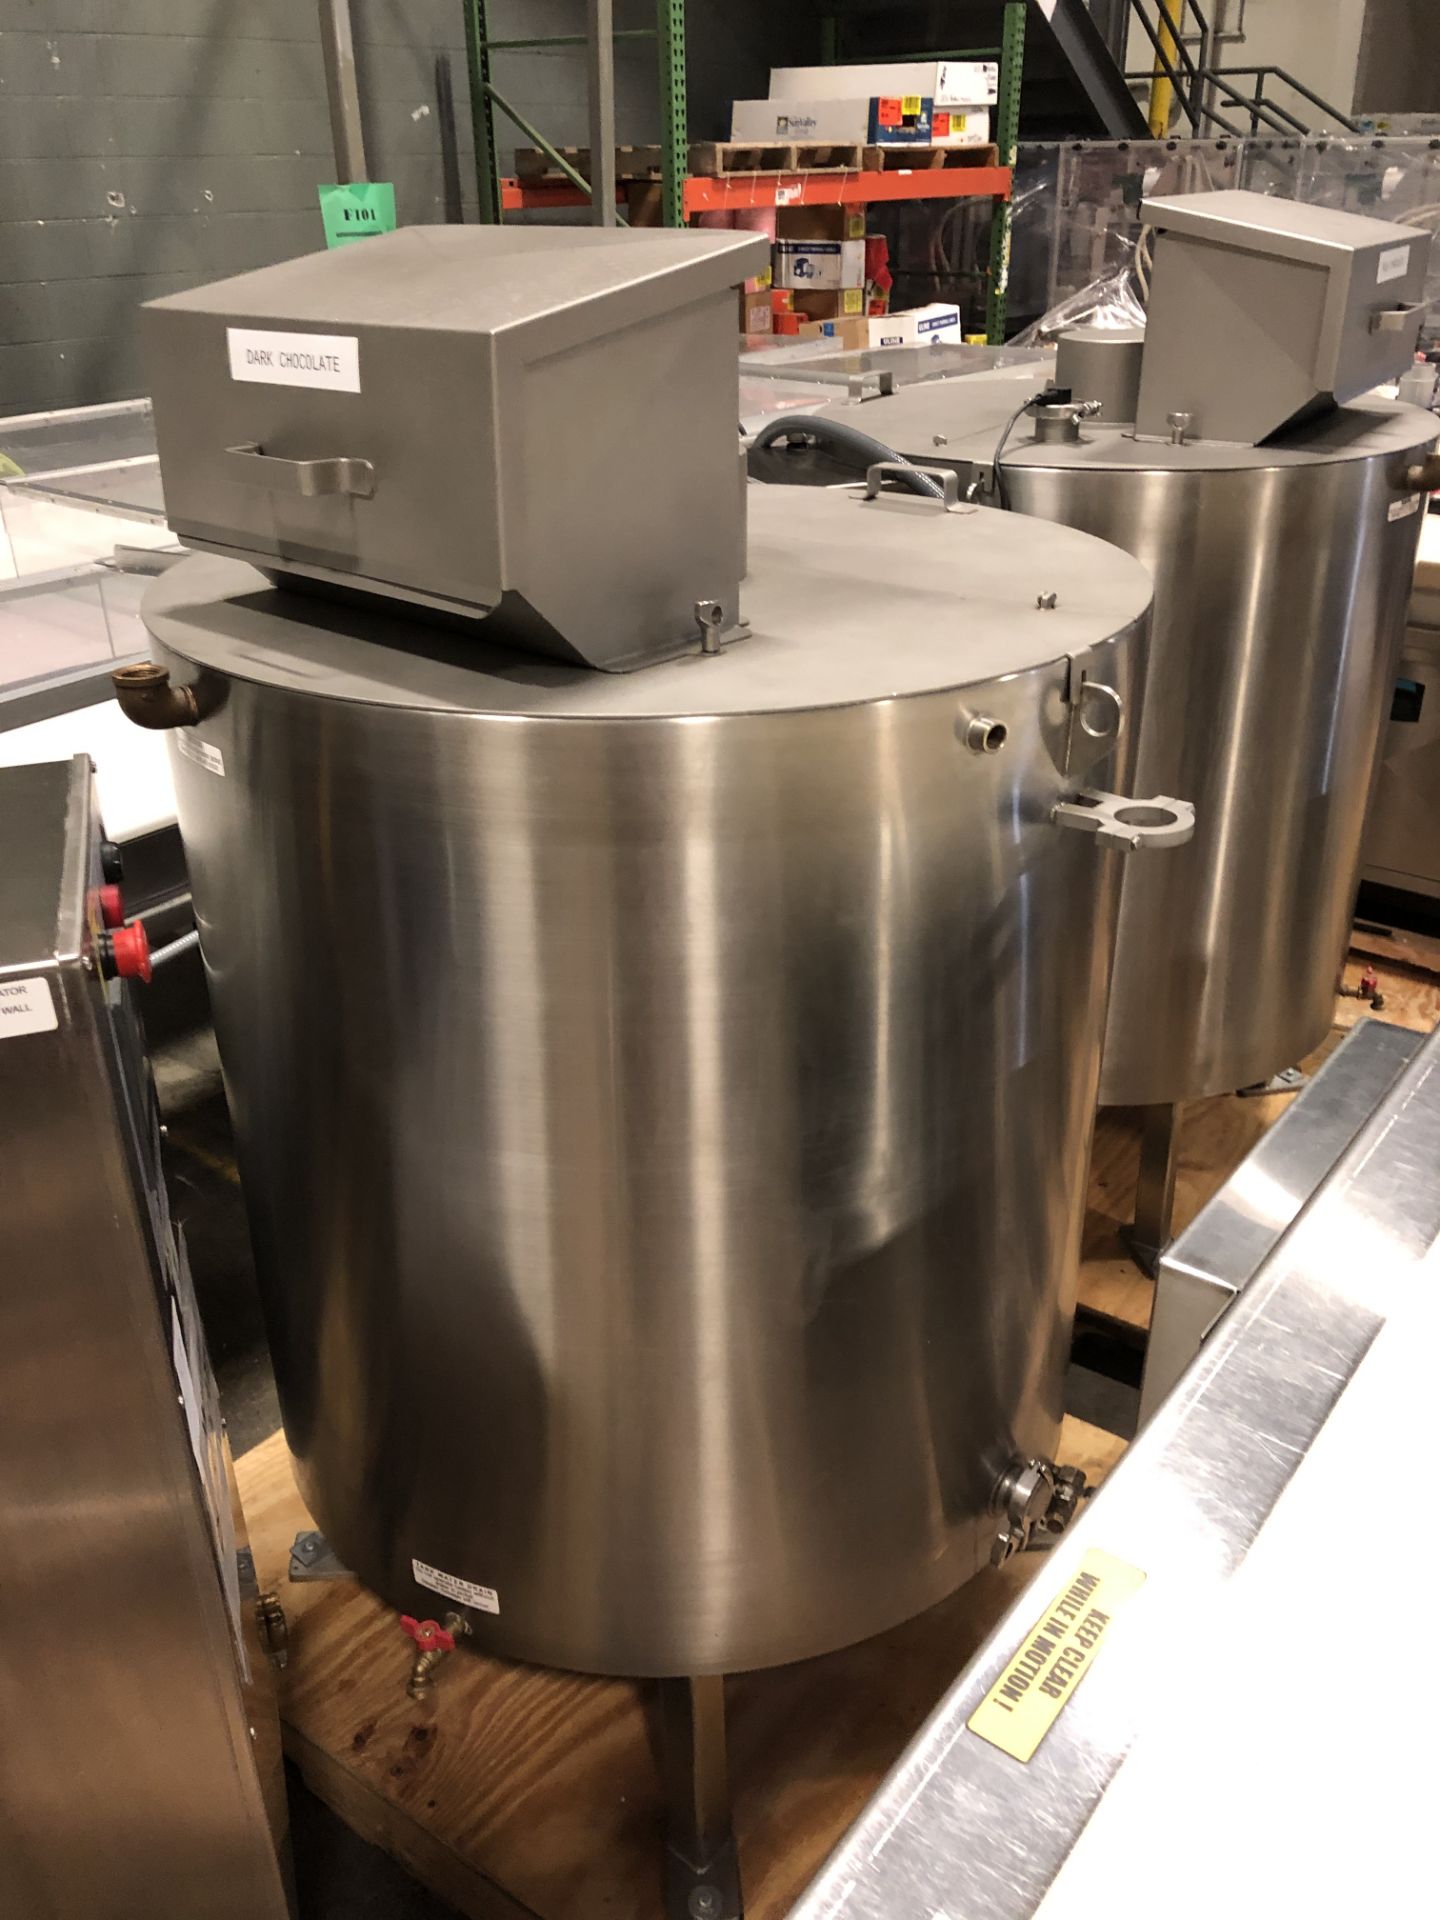 Savage Stainless Steel 1250-lb Chocolate Melter, model 0974-36, with PLC touchscreen controls, - Image 2 of 3